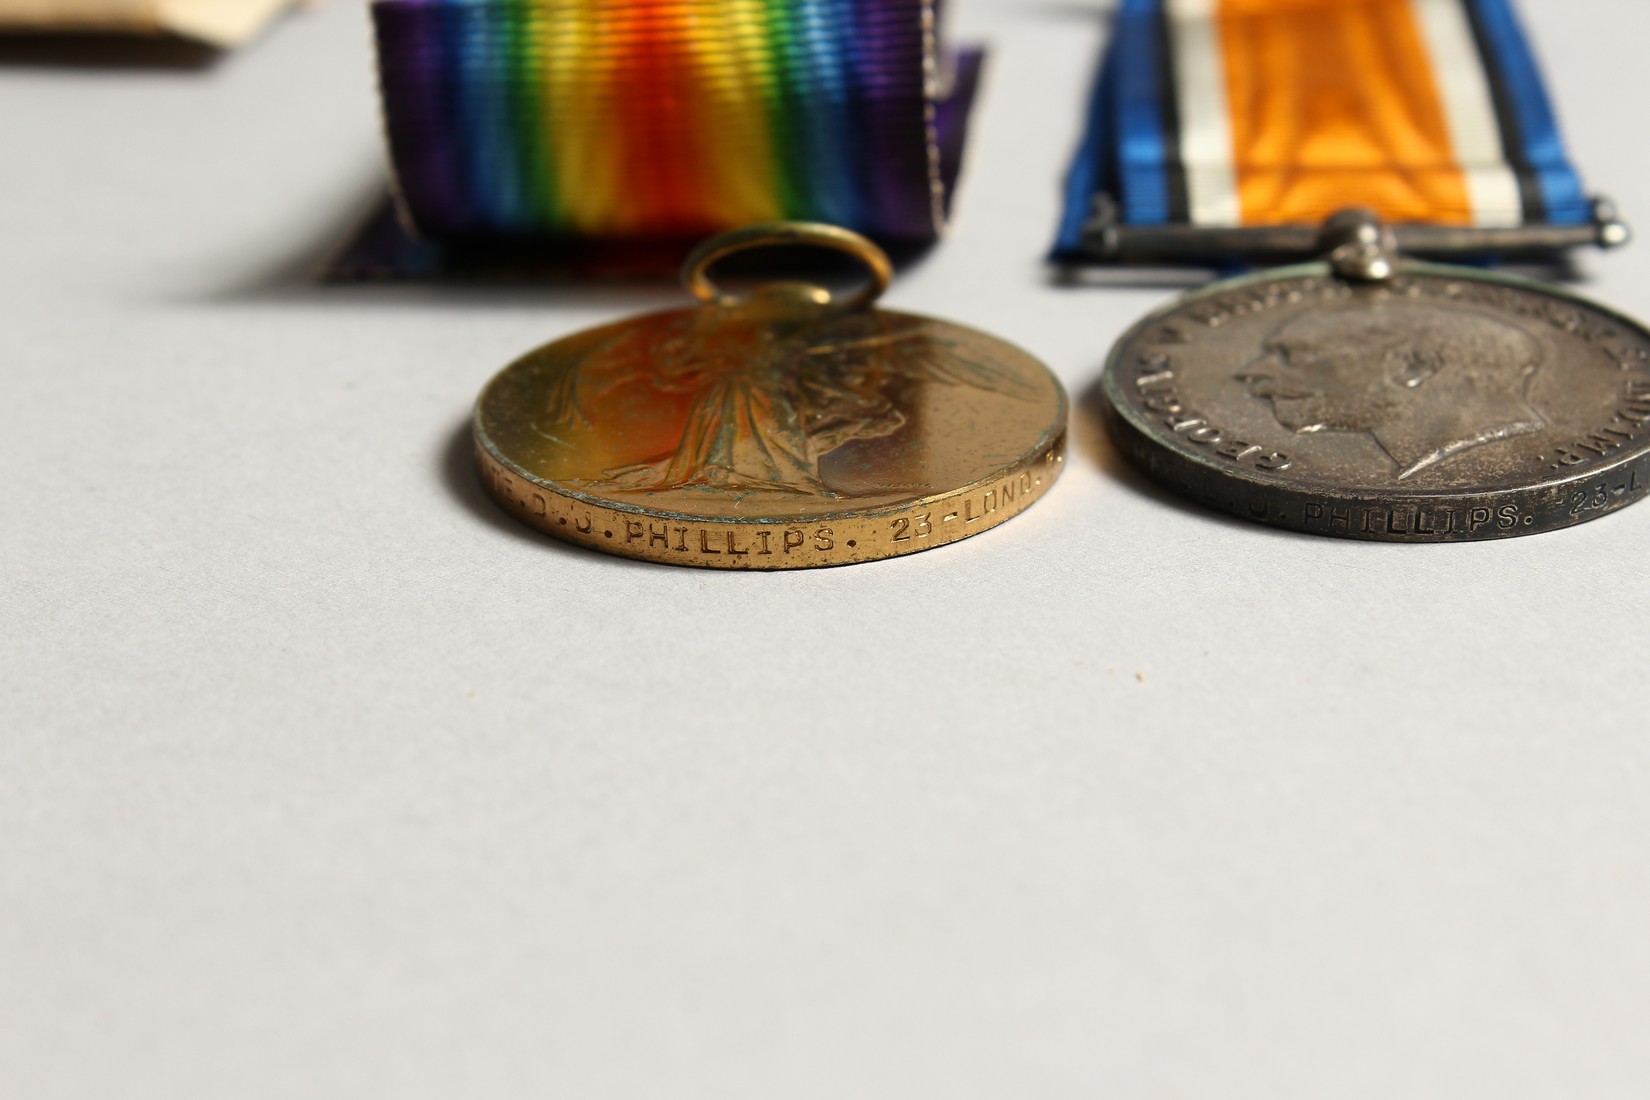 THE MEDALS OF PTE. L. J. PHILLIPS, 23rd LONDON REG. Later 13524. Army Pay Corps. - Image 4 of 7